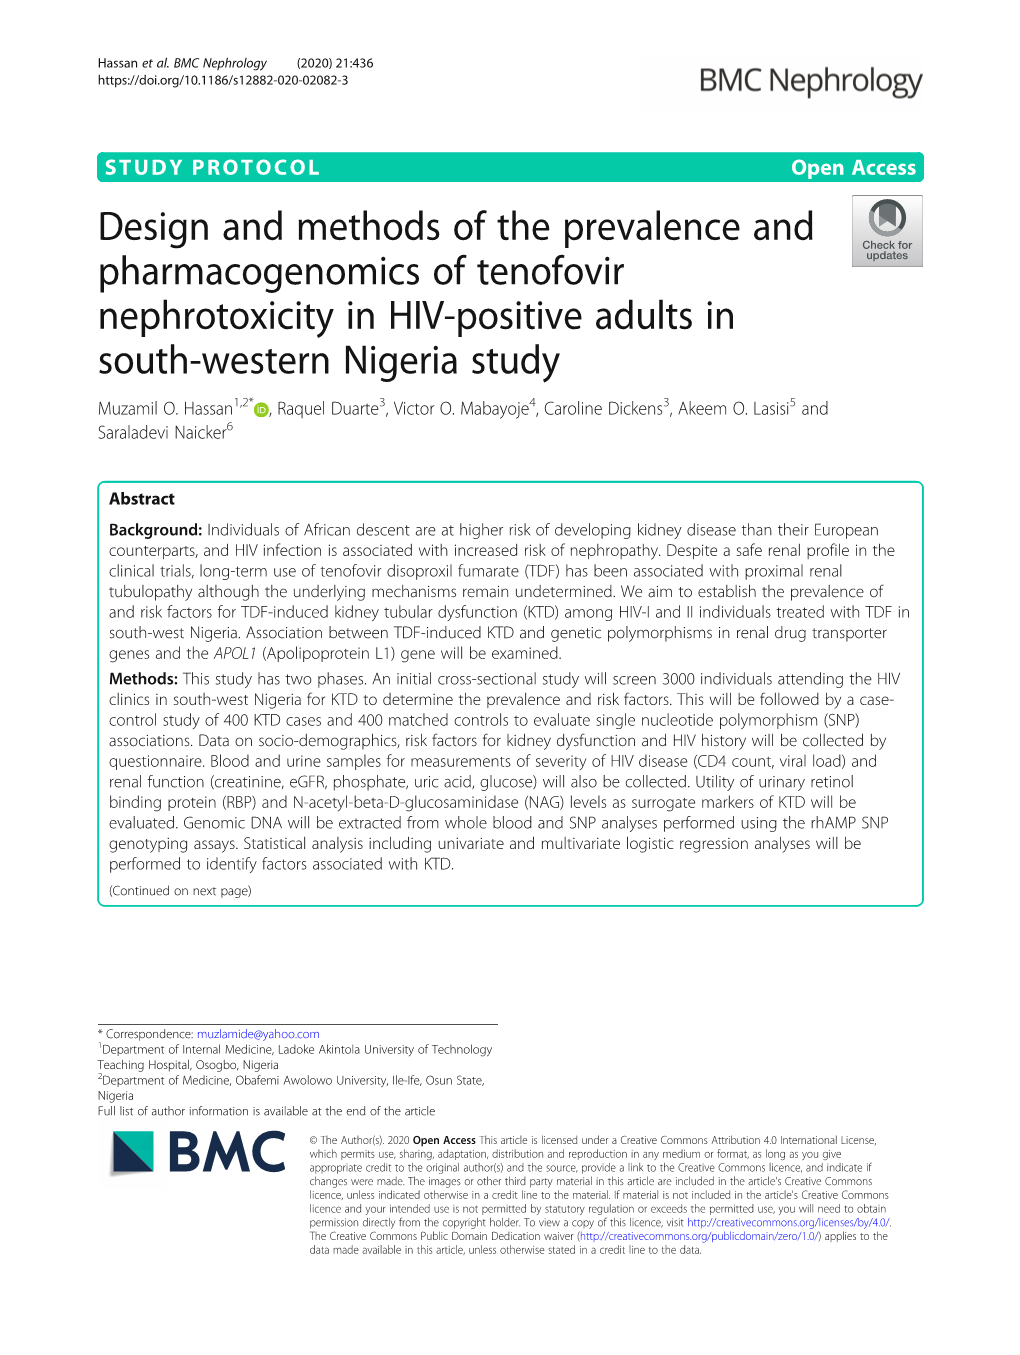 Design and Methods of the Prevalence and Pharmacogenomics of Tenofovir Nephrotoxicity in HIV-Positive Adults in South-Western Nigeria Study Muzamil O